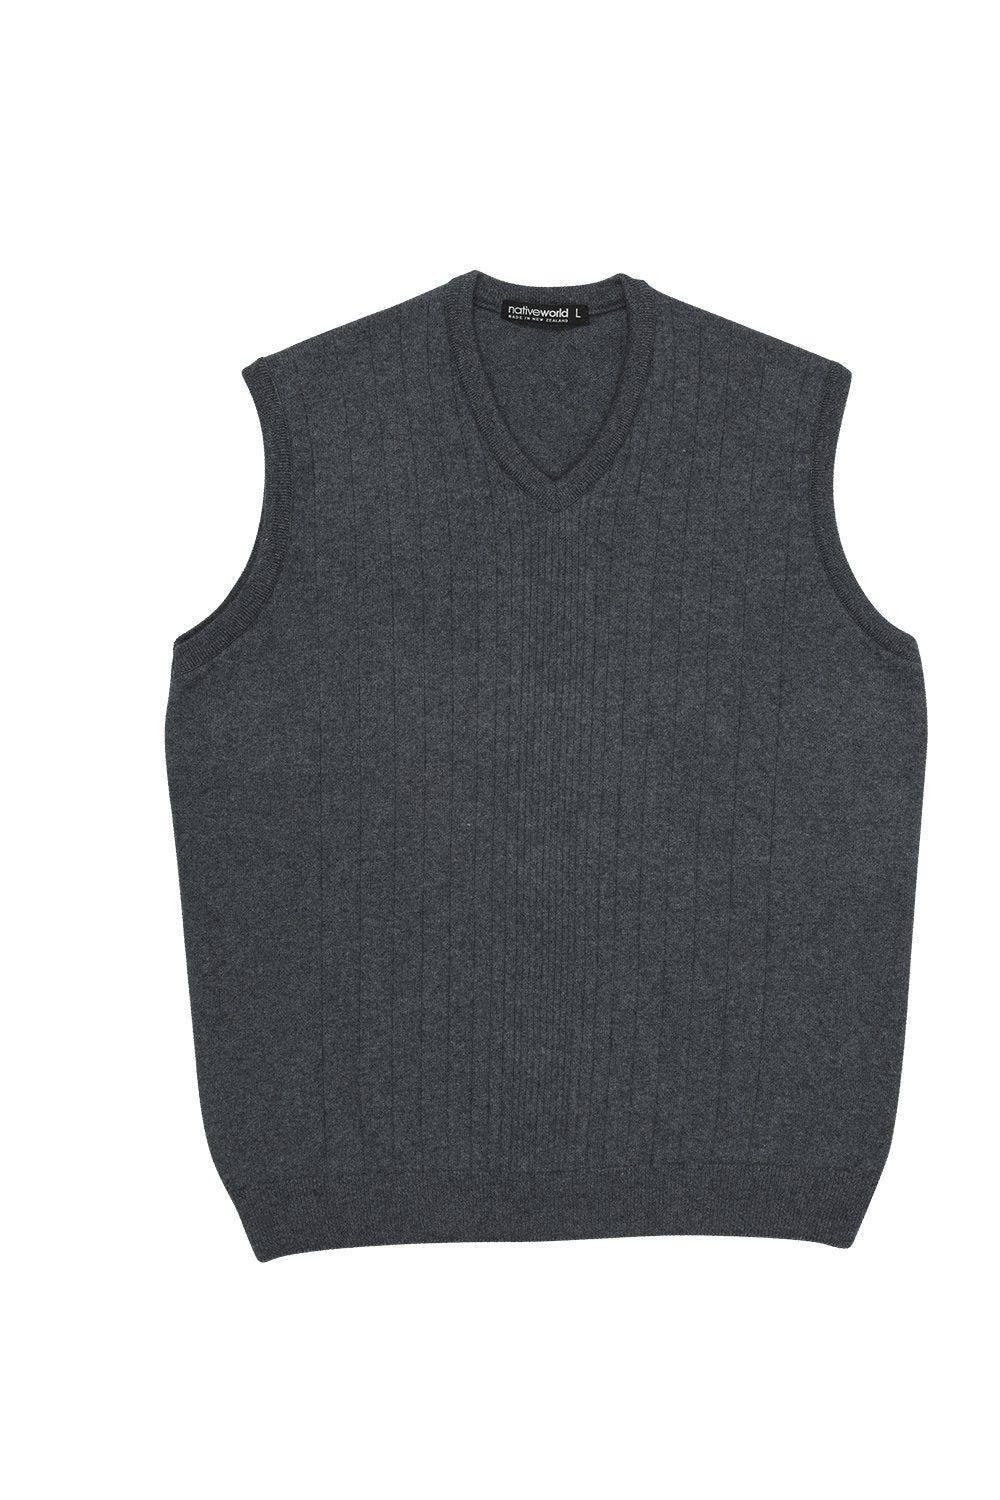 VEE NECK RIB FEATURE VEST - Woolshed Gallery